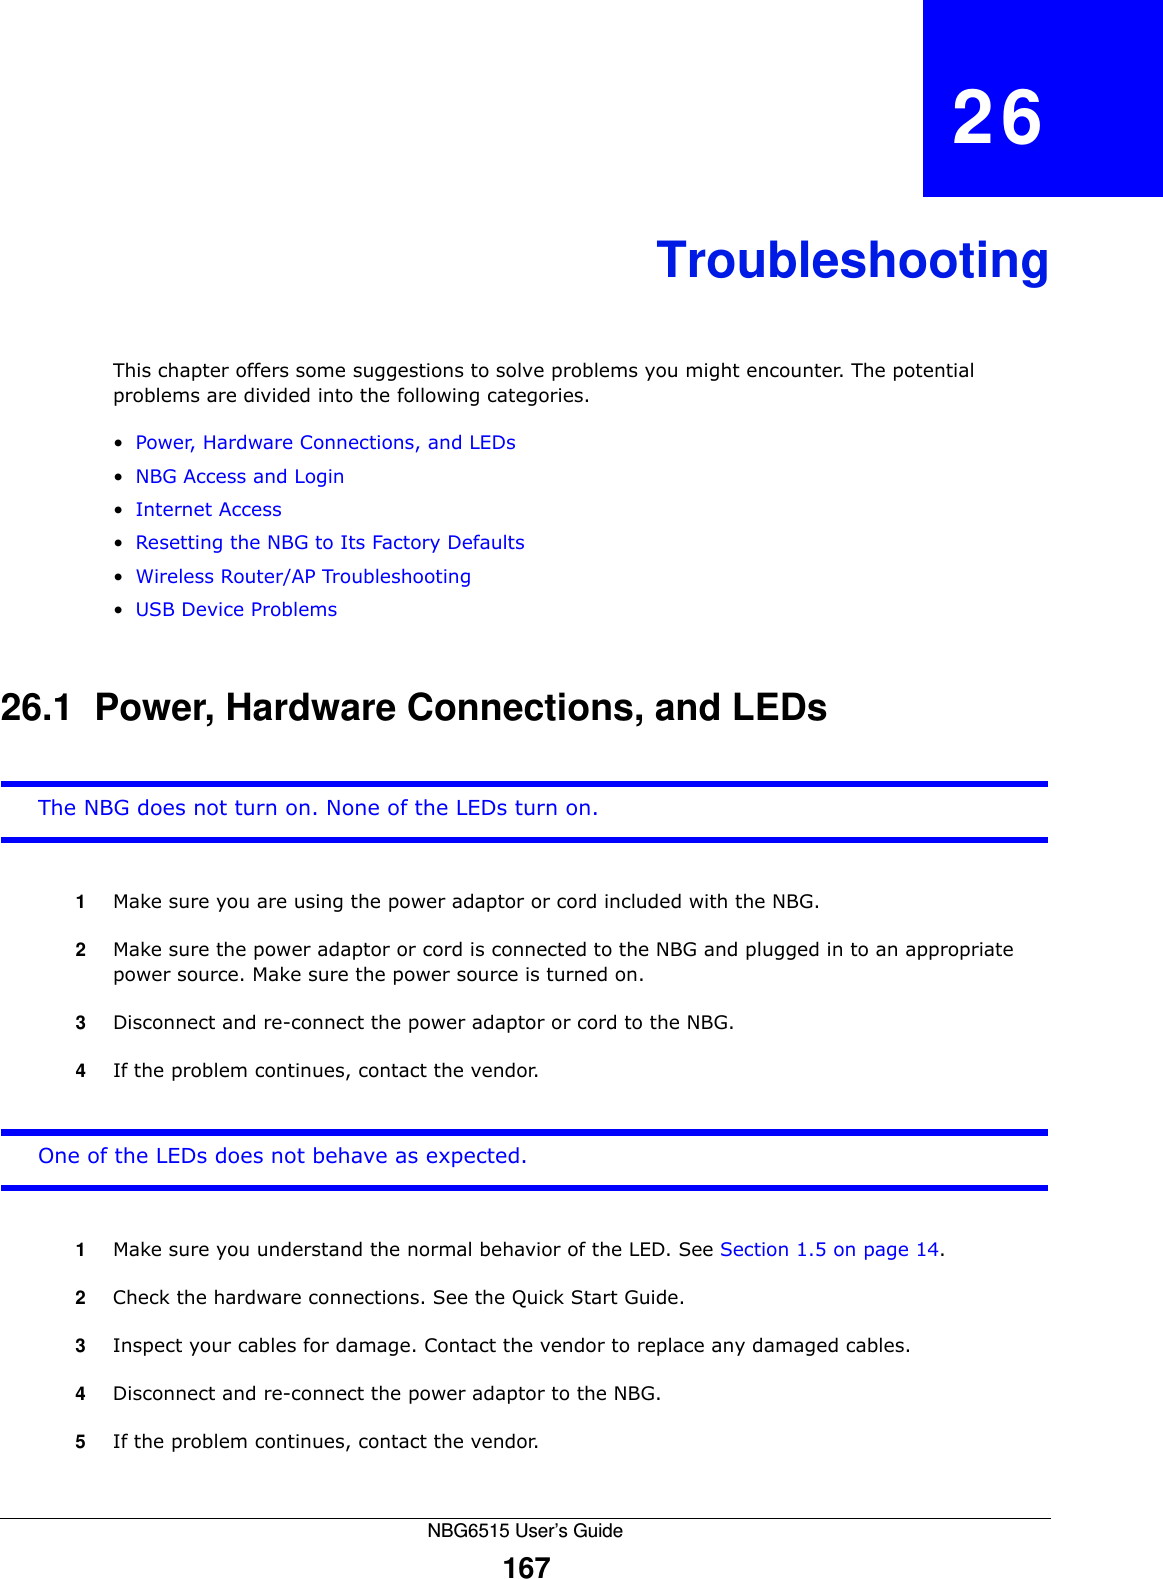 NBG6515 User’s Guide167CHAPTER   26TroubleshootingThis chapter offers some suggestions to solve problems you might encounter. The potential problems are divided into the following categories. •Power, Hardware Connections, and LEDs•NBG Access and Login•Internet Access•Resetting the NBG to Its Factory Defaults•Wireless Router/AP Troubleshooting•USB Device Problems26.1  Power, Hardware Connections, and LEDsThe NBG does not turn on. None of the LEDs turn on.1Make sure you are using the power adaptor or cord included with the NBG.2Make sure the power adaptor or cord is connected to the NBG and plugged in to an appropriate power source. Make sure the power source is turned on.3Disconnect and re-connect the power adaptor or cord to the NBG.4If the problem continues, contact the vendor.One of the LEDs does not behave as expected.1Make sure you understand the normal behavior of the LED. See Section 1.5 on page 14.2Check the hardware connections. See the Quick Start Guide. 3Inspect your cables for damage. Contact the vendor to replace any damaged cables.4Disconnect and re-connect the power adaptor to the NBG. 5If the problem continues, contact the vendor.